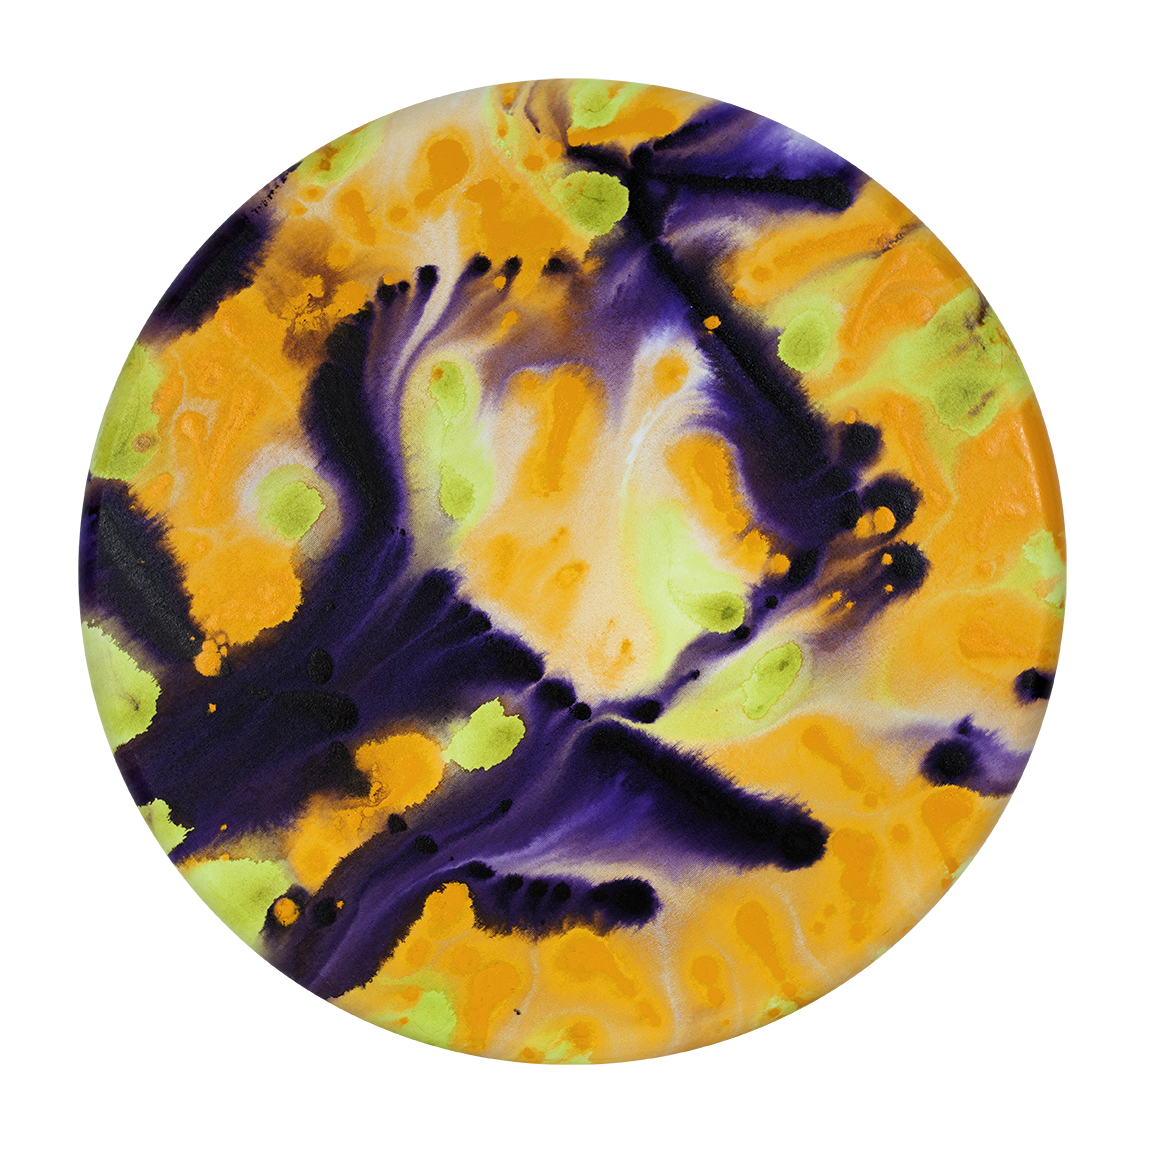 ©2021 Alicia R Peterson, *Compassion*. Acrylic on 24-inch diameter convex canvas. Photographer: Peter Scheer.